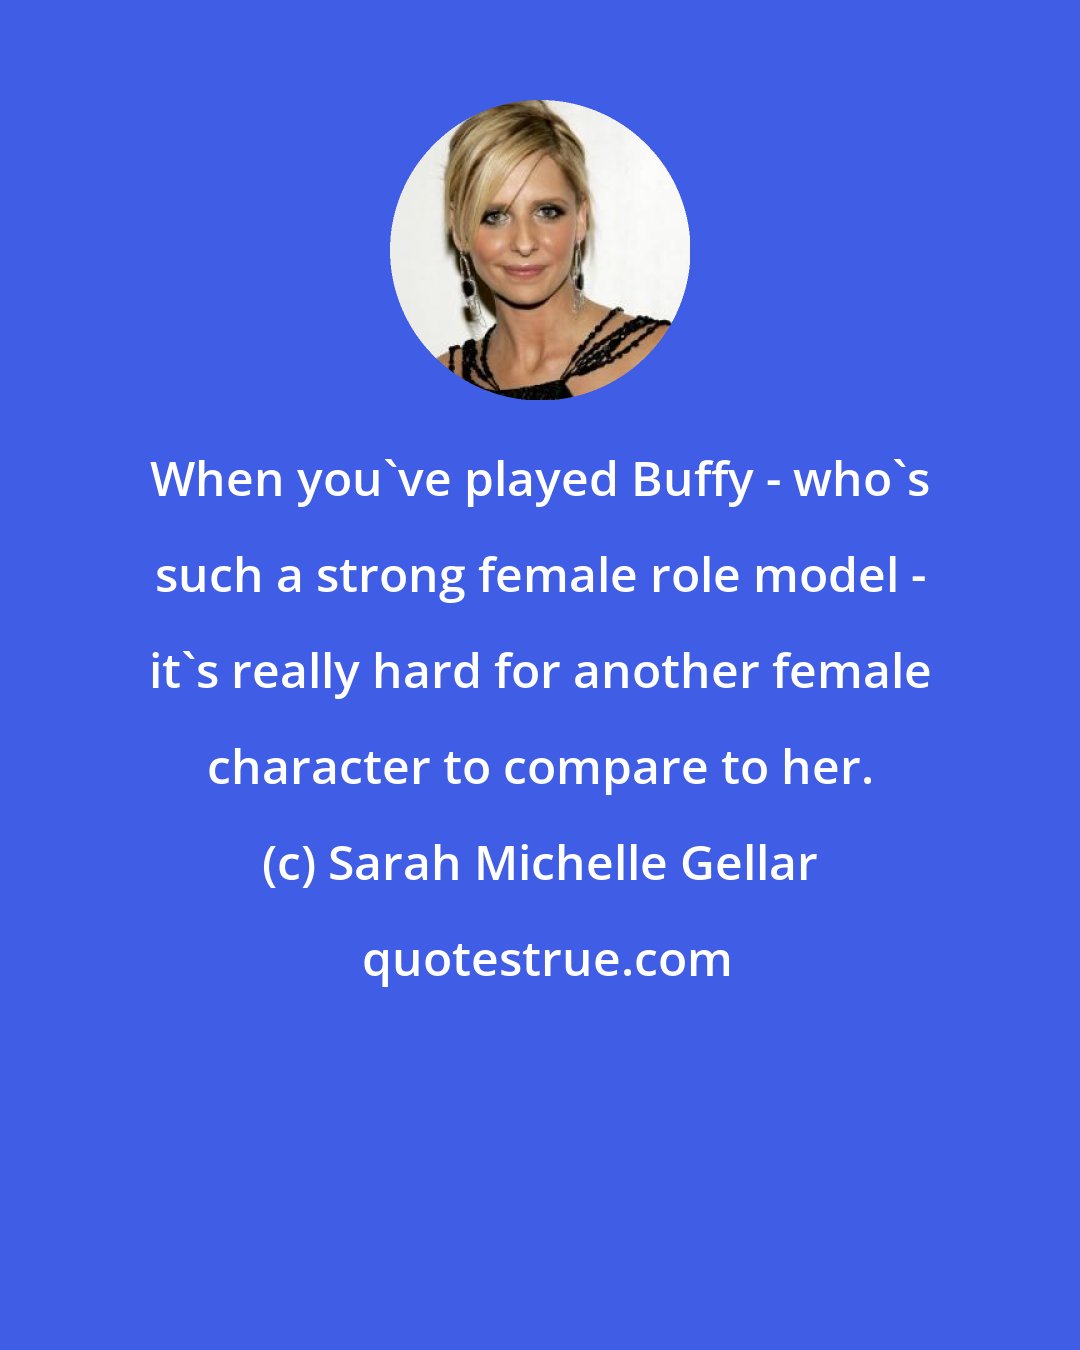 Sarah Michelle Gellar: When you've played Buffy - who's such a strong female role model - it's really hard for another female character to compare to her.